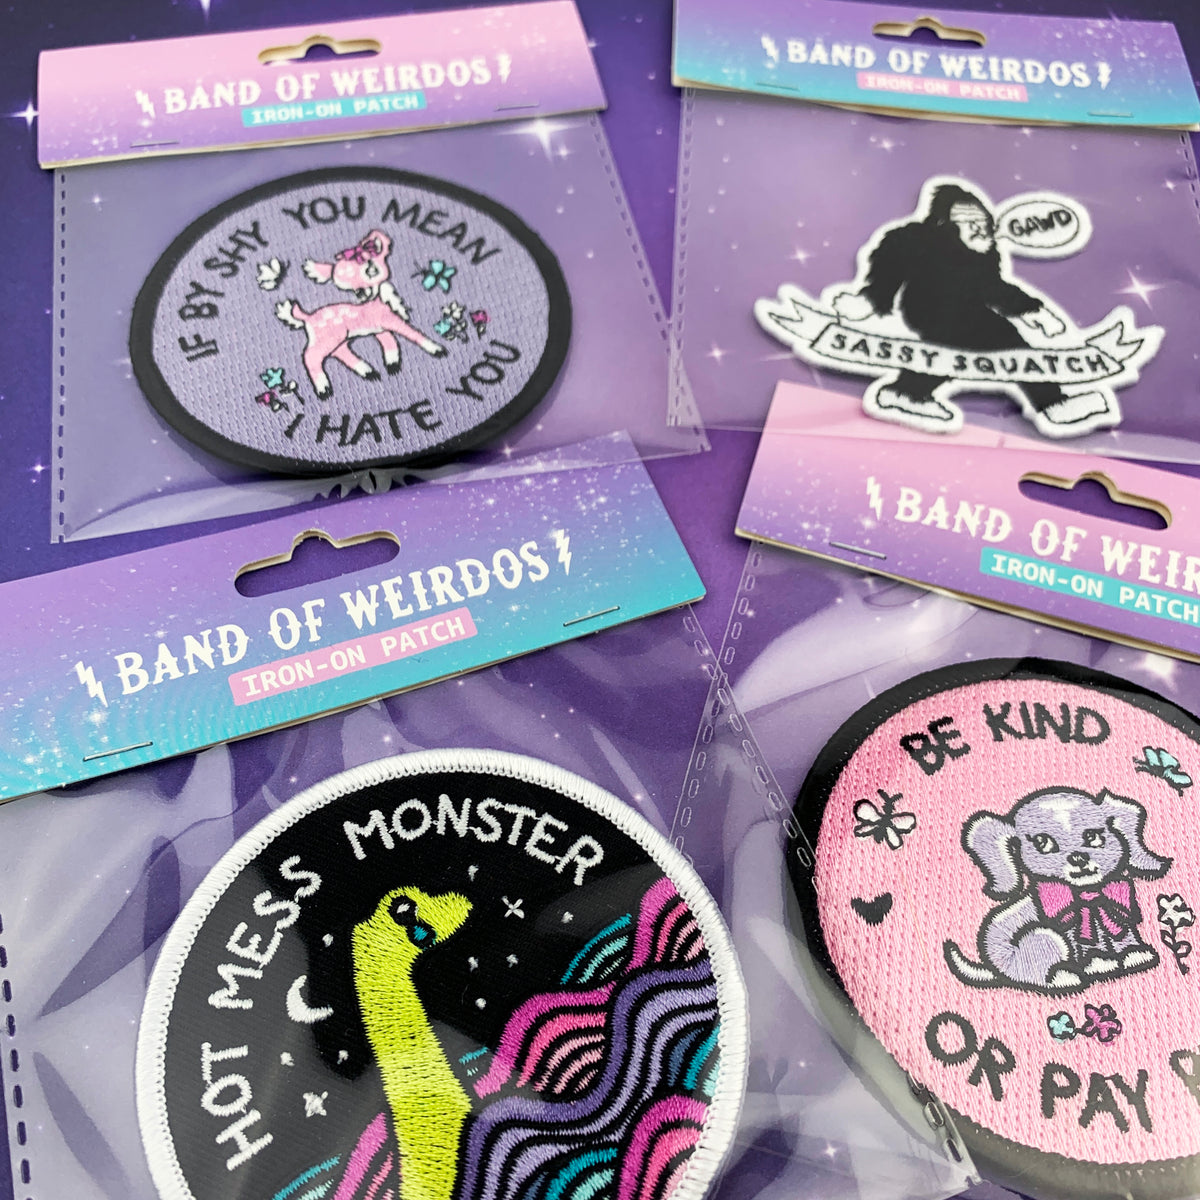 WE ARE THE WEIRDOS // PATCH